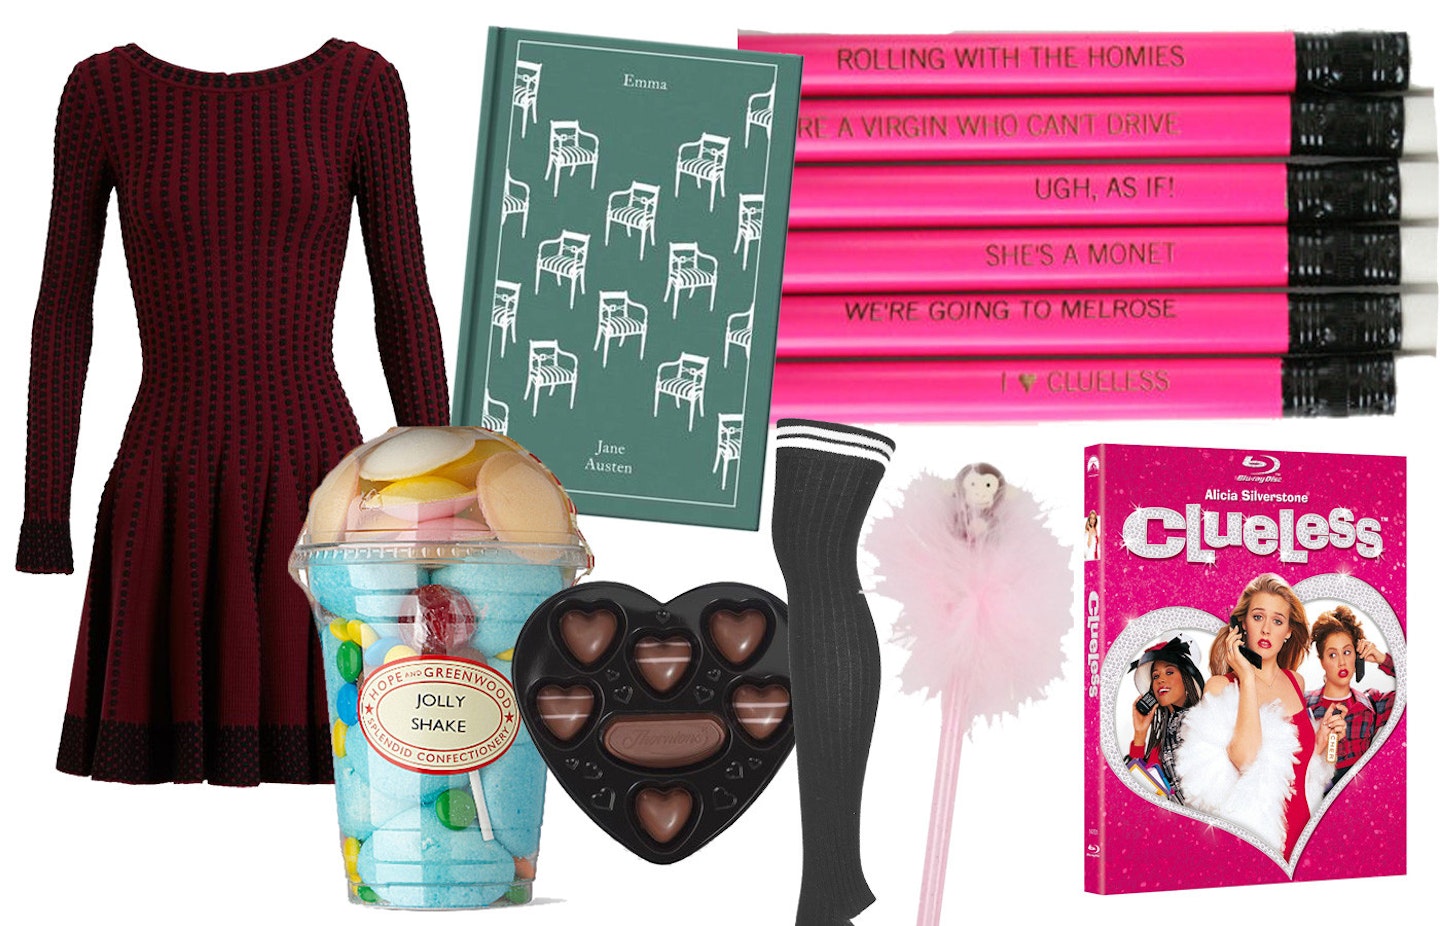 Clueless gift guide